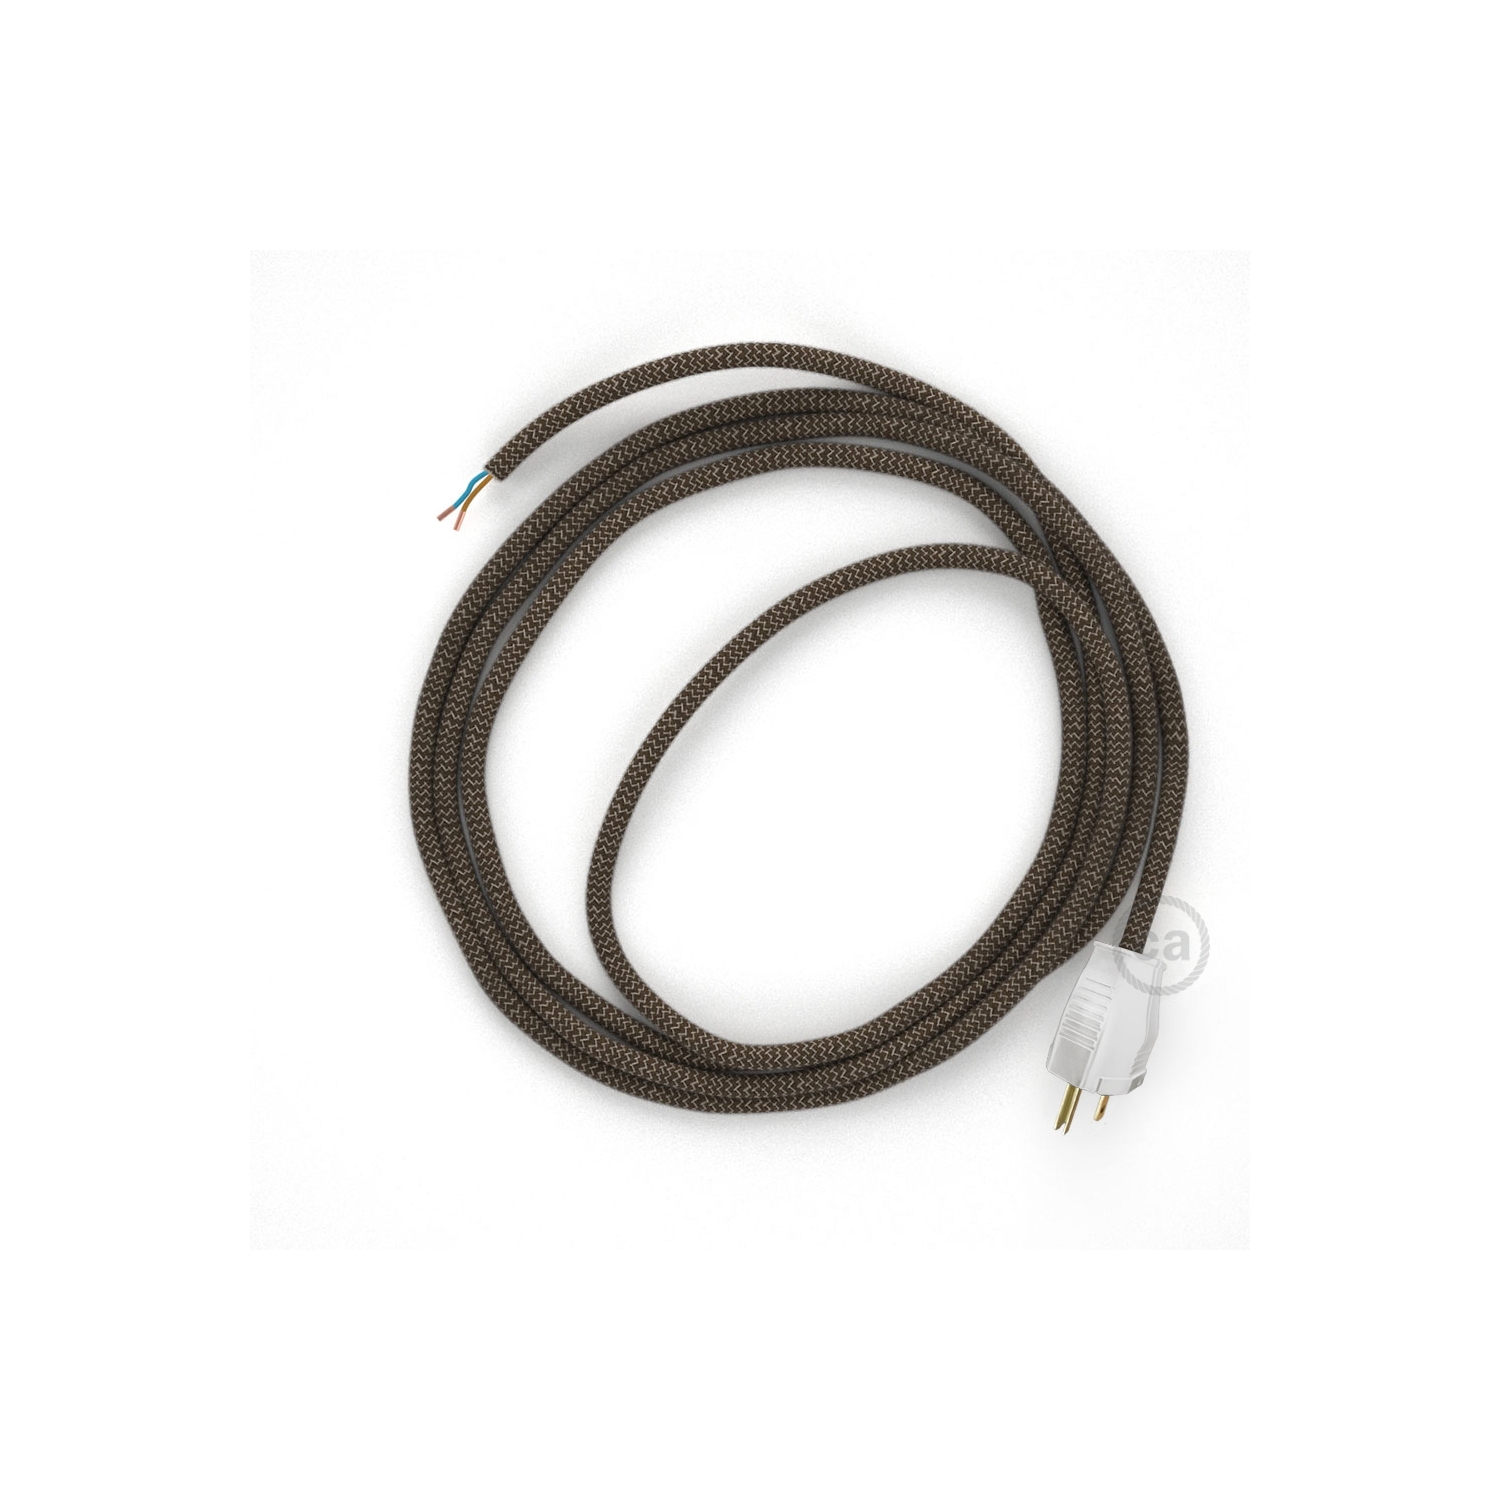 Cord-set - RD73 Natural & Brown Linen Chevron Covered Round Cable